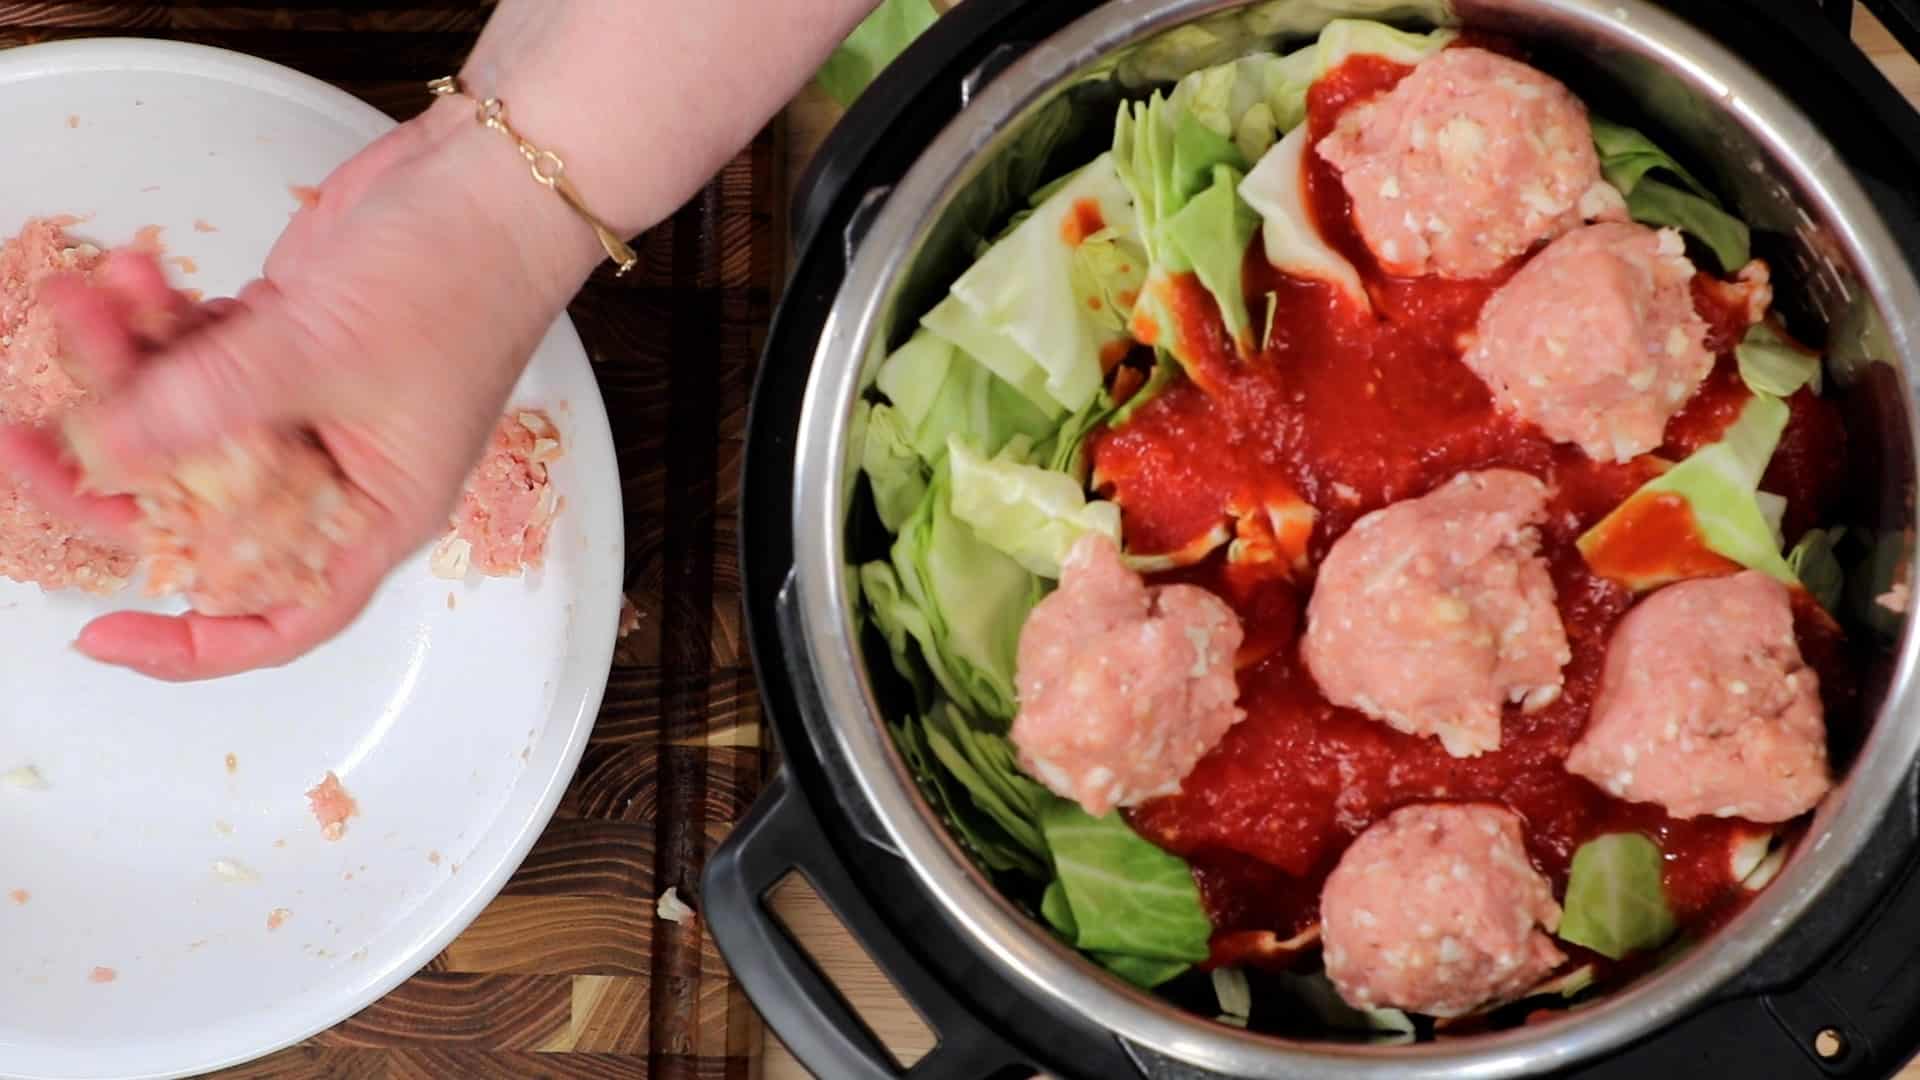 Second Layer of Meatballs Over Cabbage